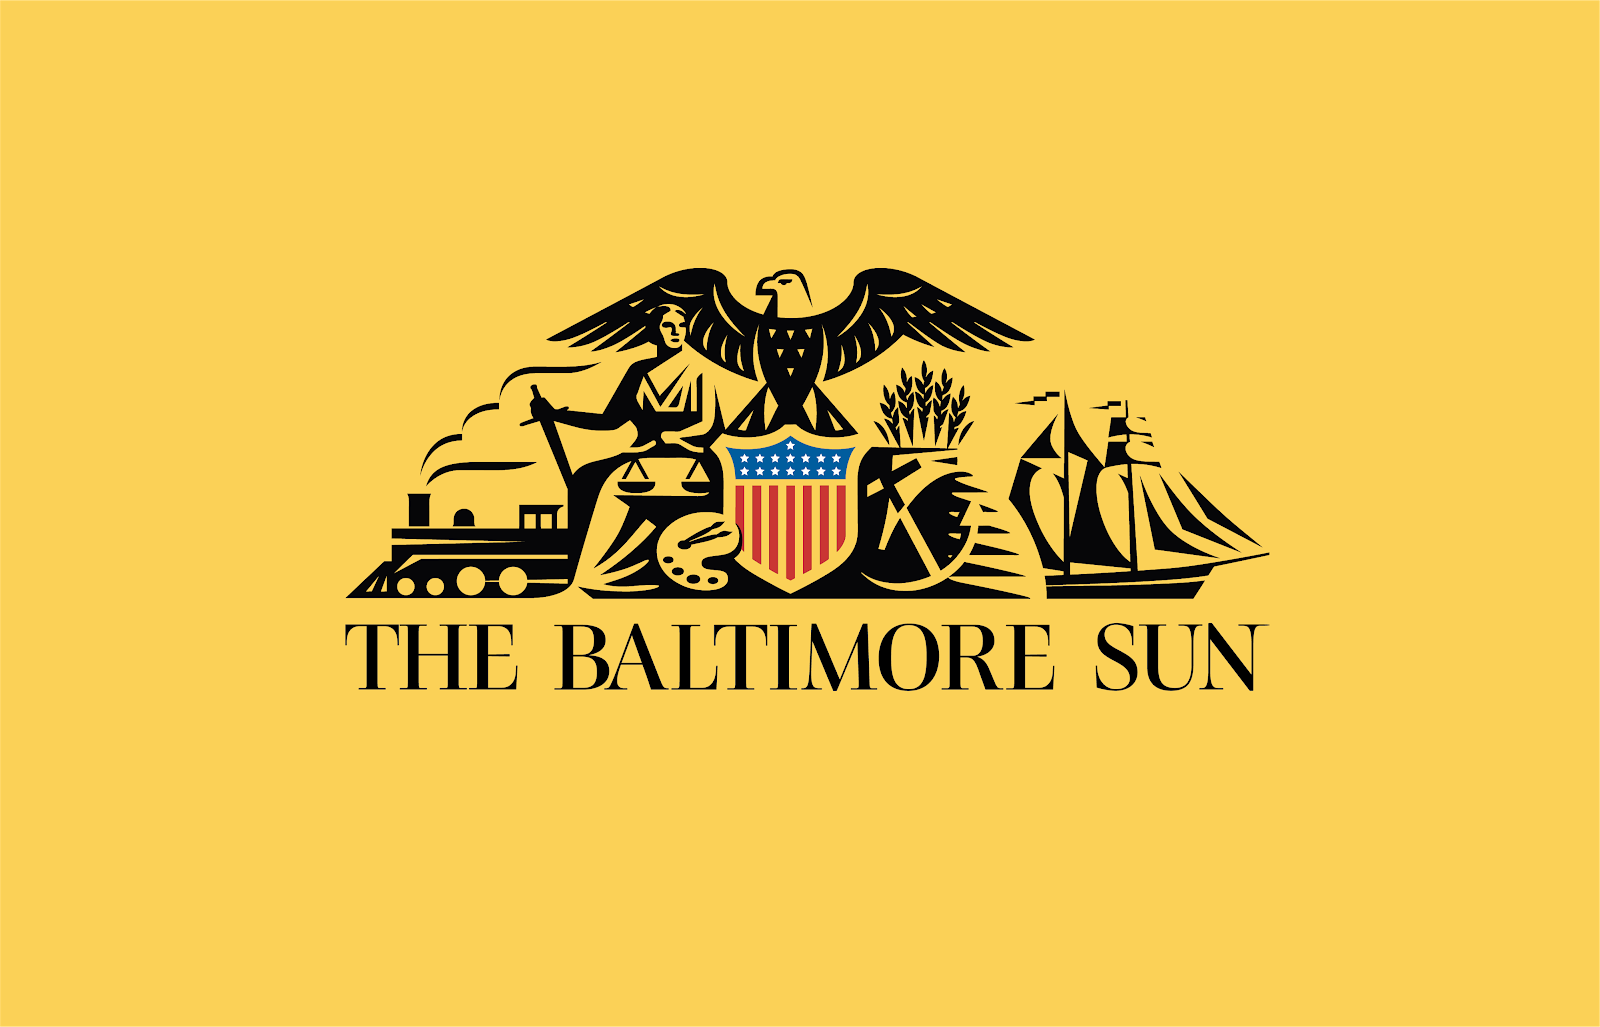 Baltimore’s port expected to rebound from Key Bridge disaster once channel reopens article publisher's logo